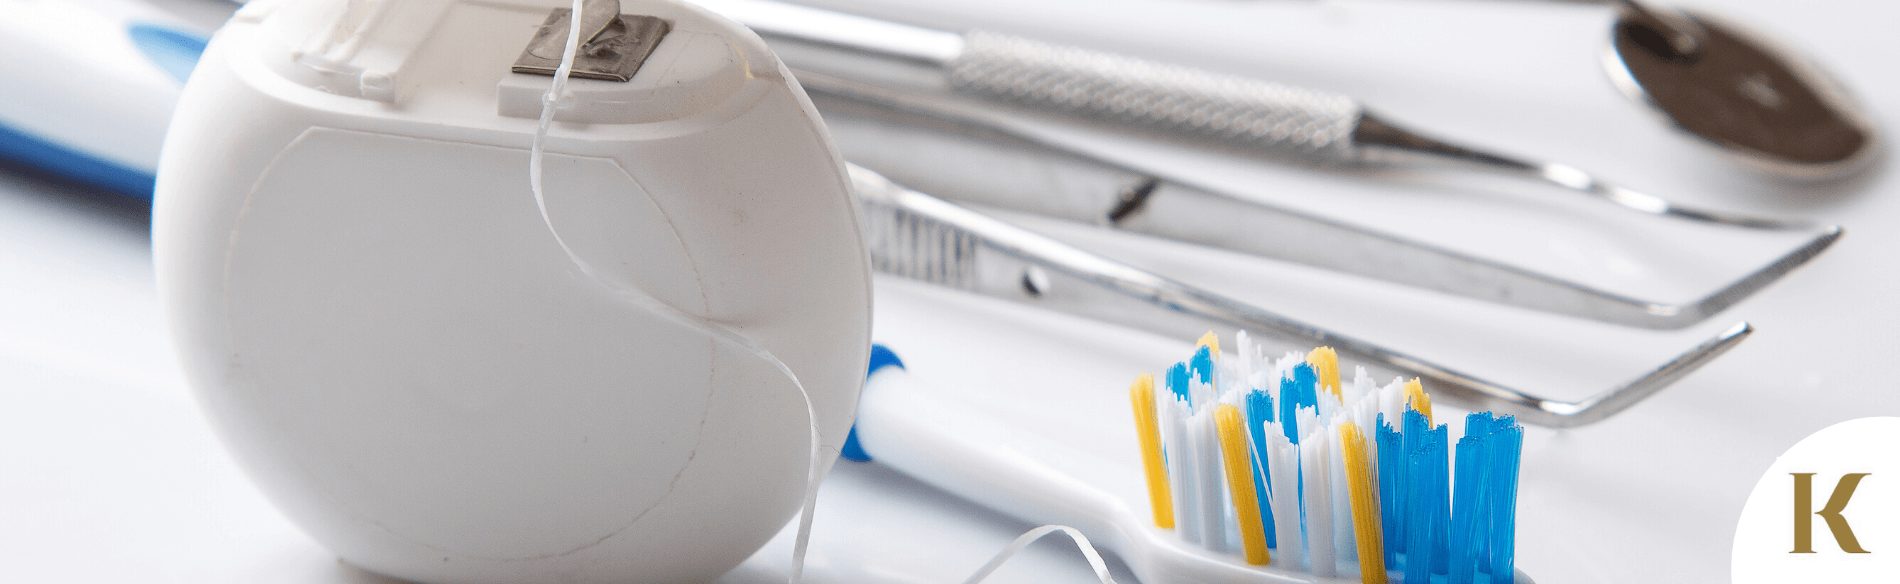 tools used for dental cleaning